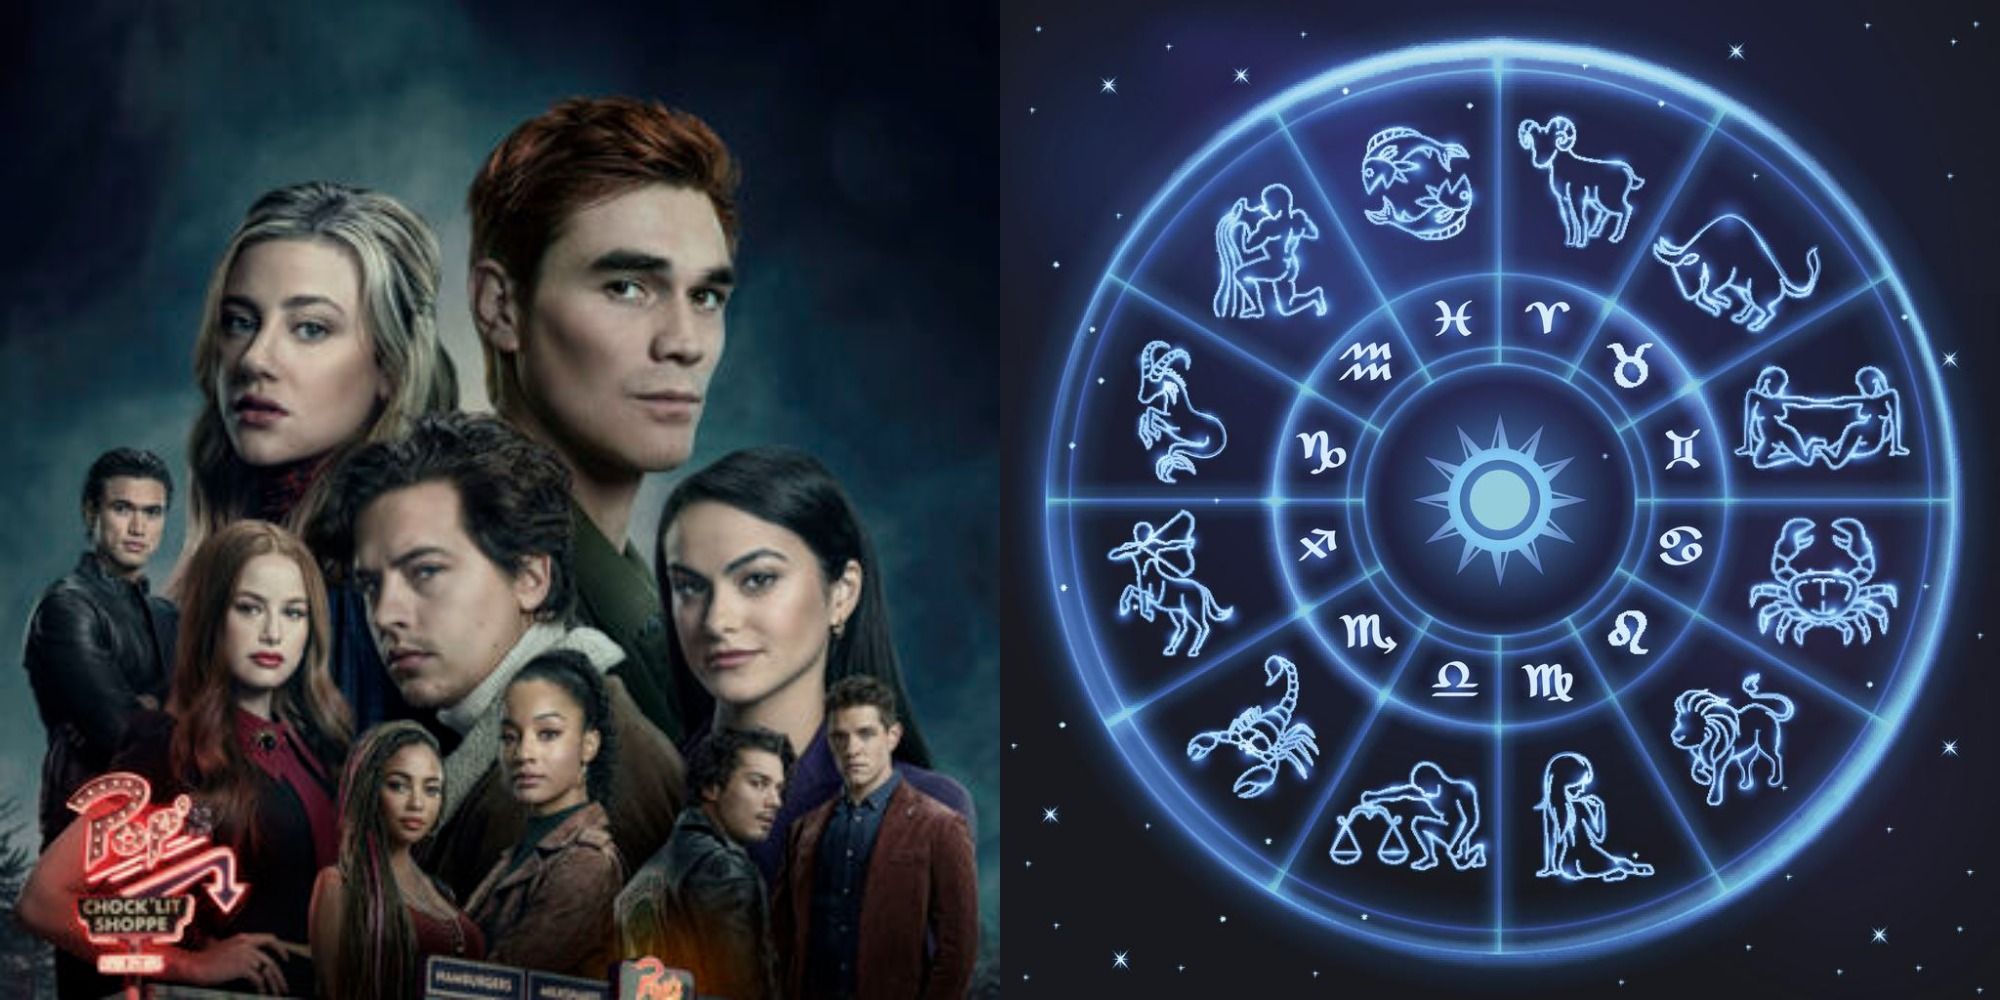 Split image showing characters from Riverdale and a zodiac wheel